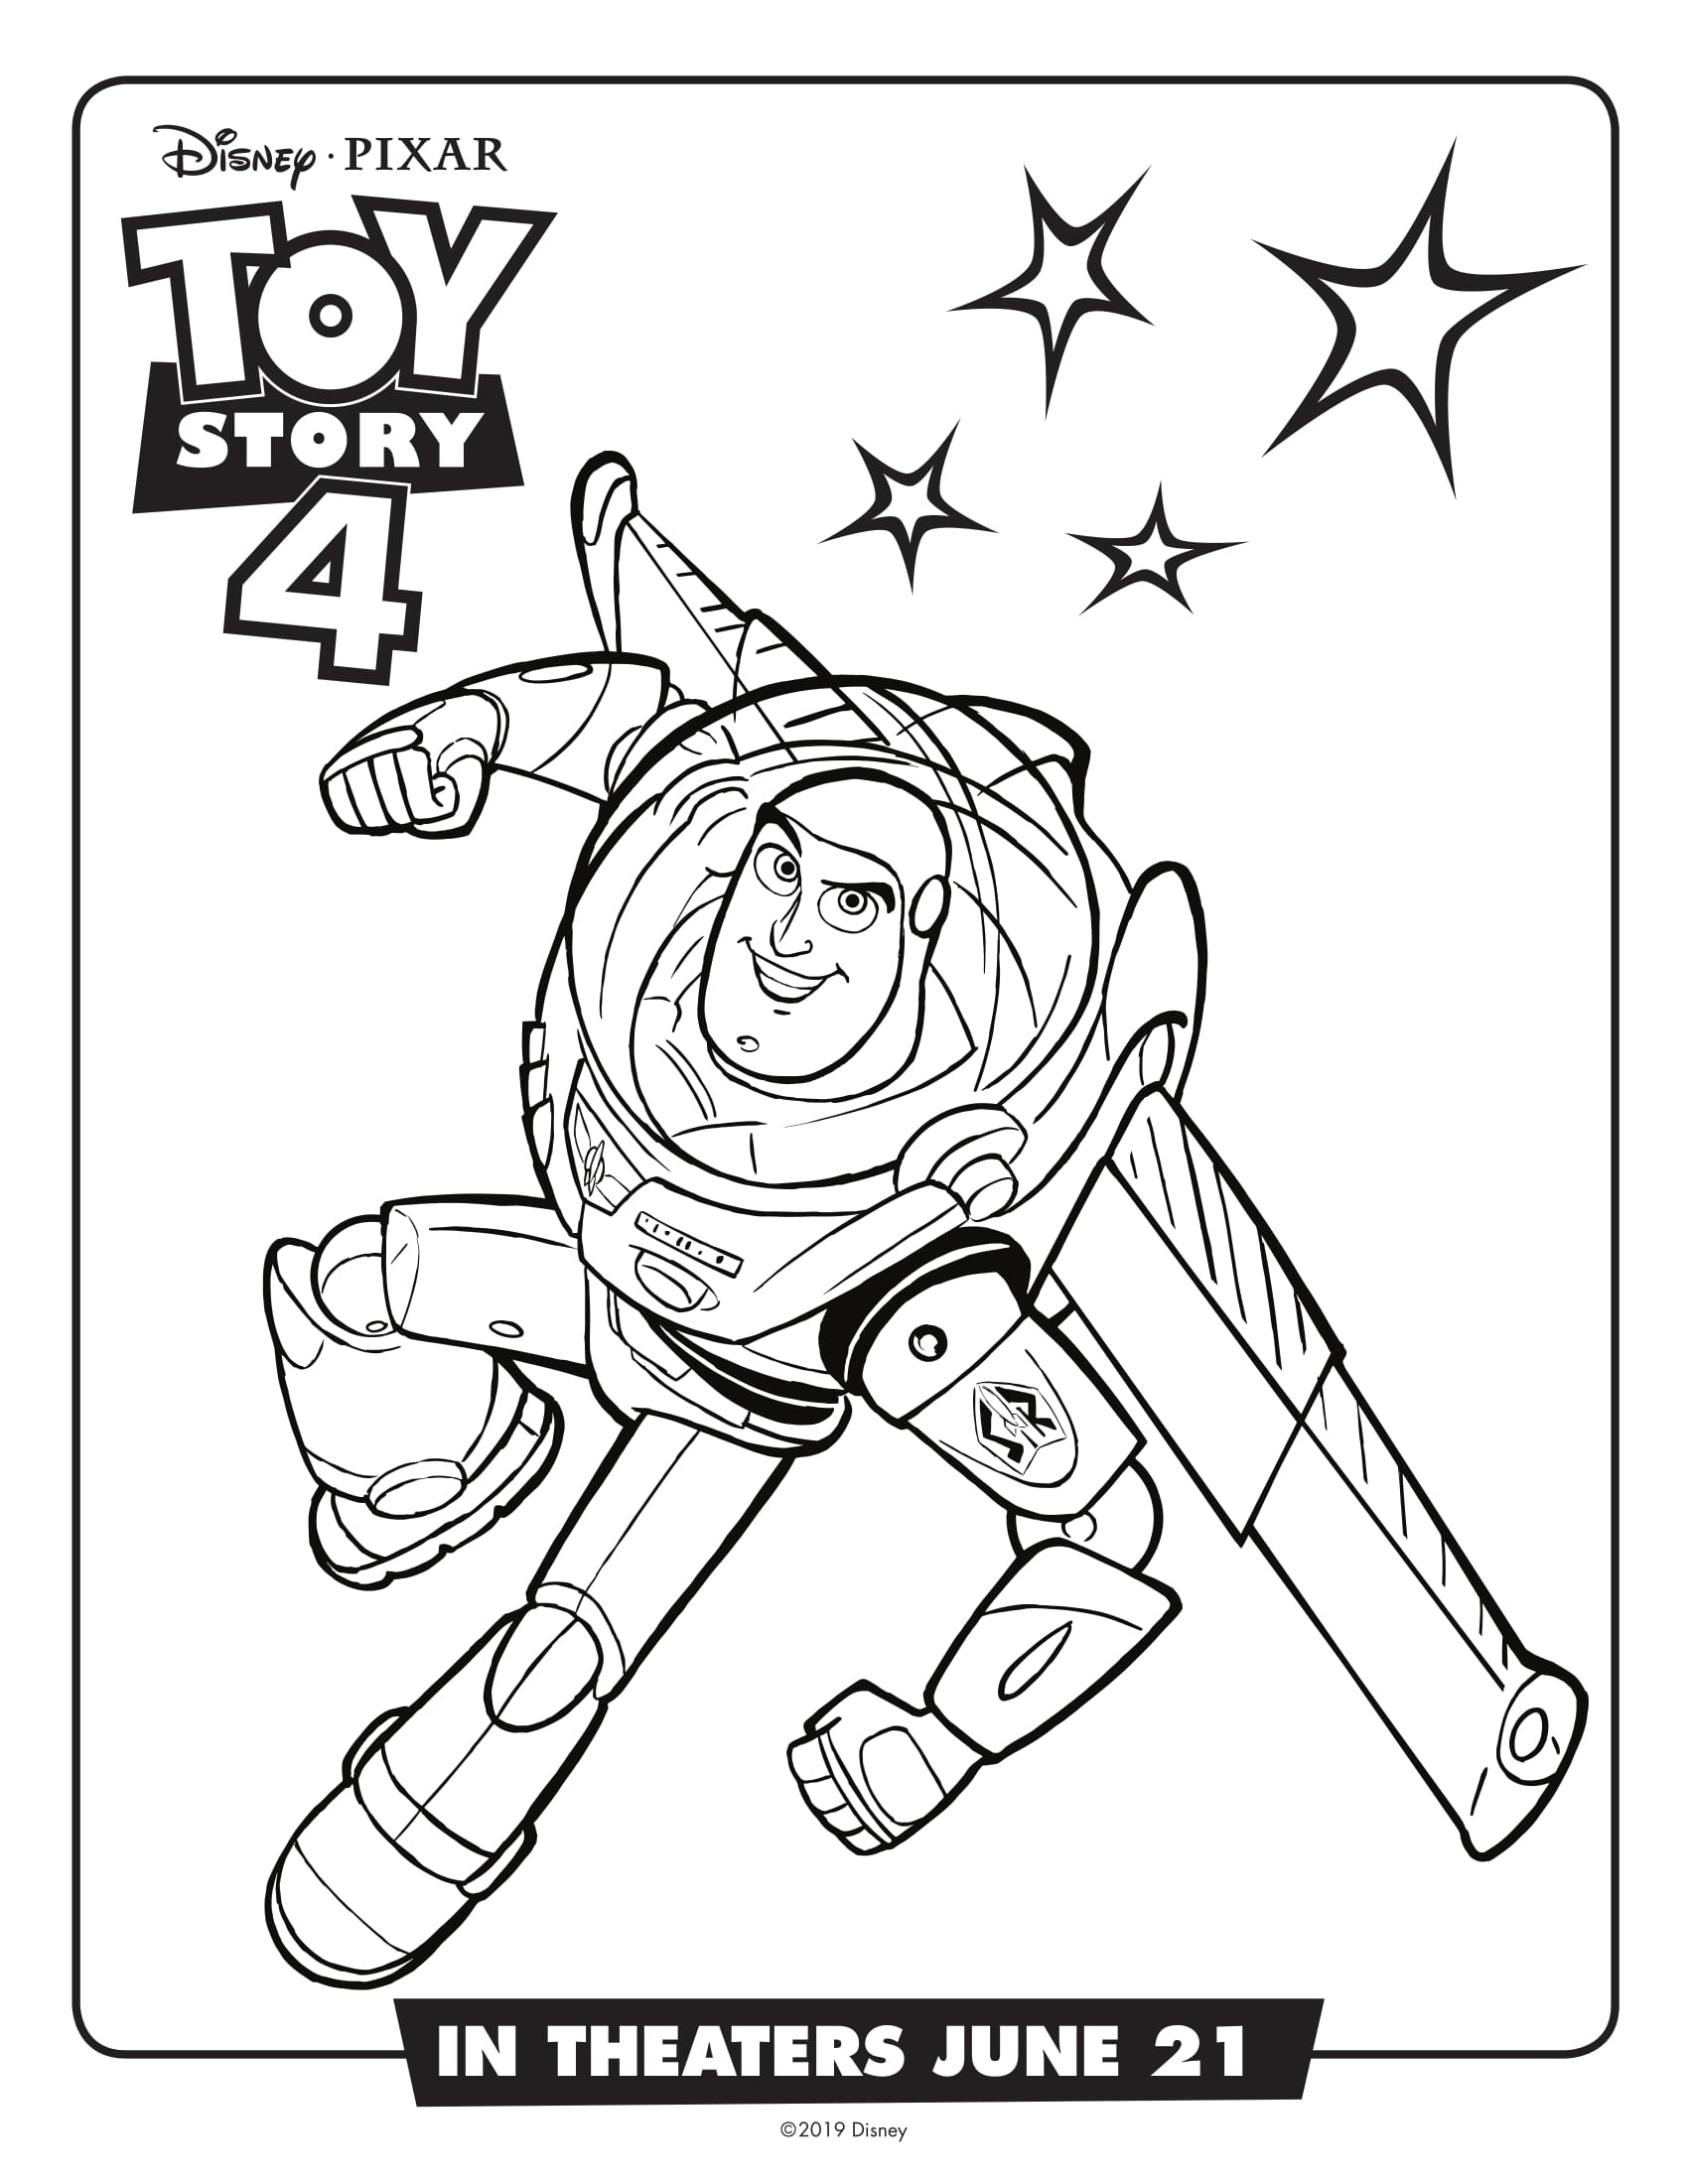 Toy Story Coloring Shop, 20 OFF   empow her.com